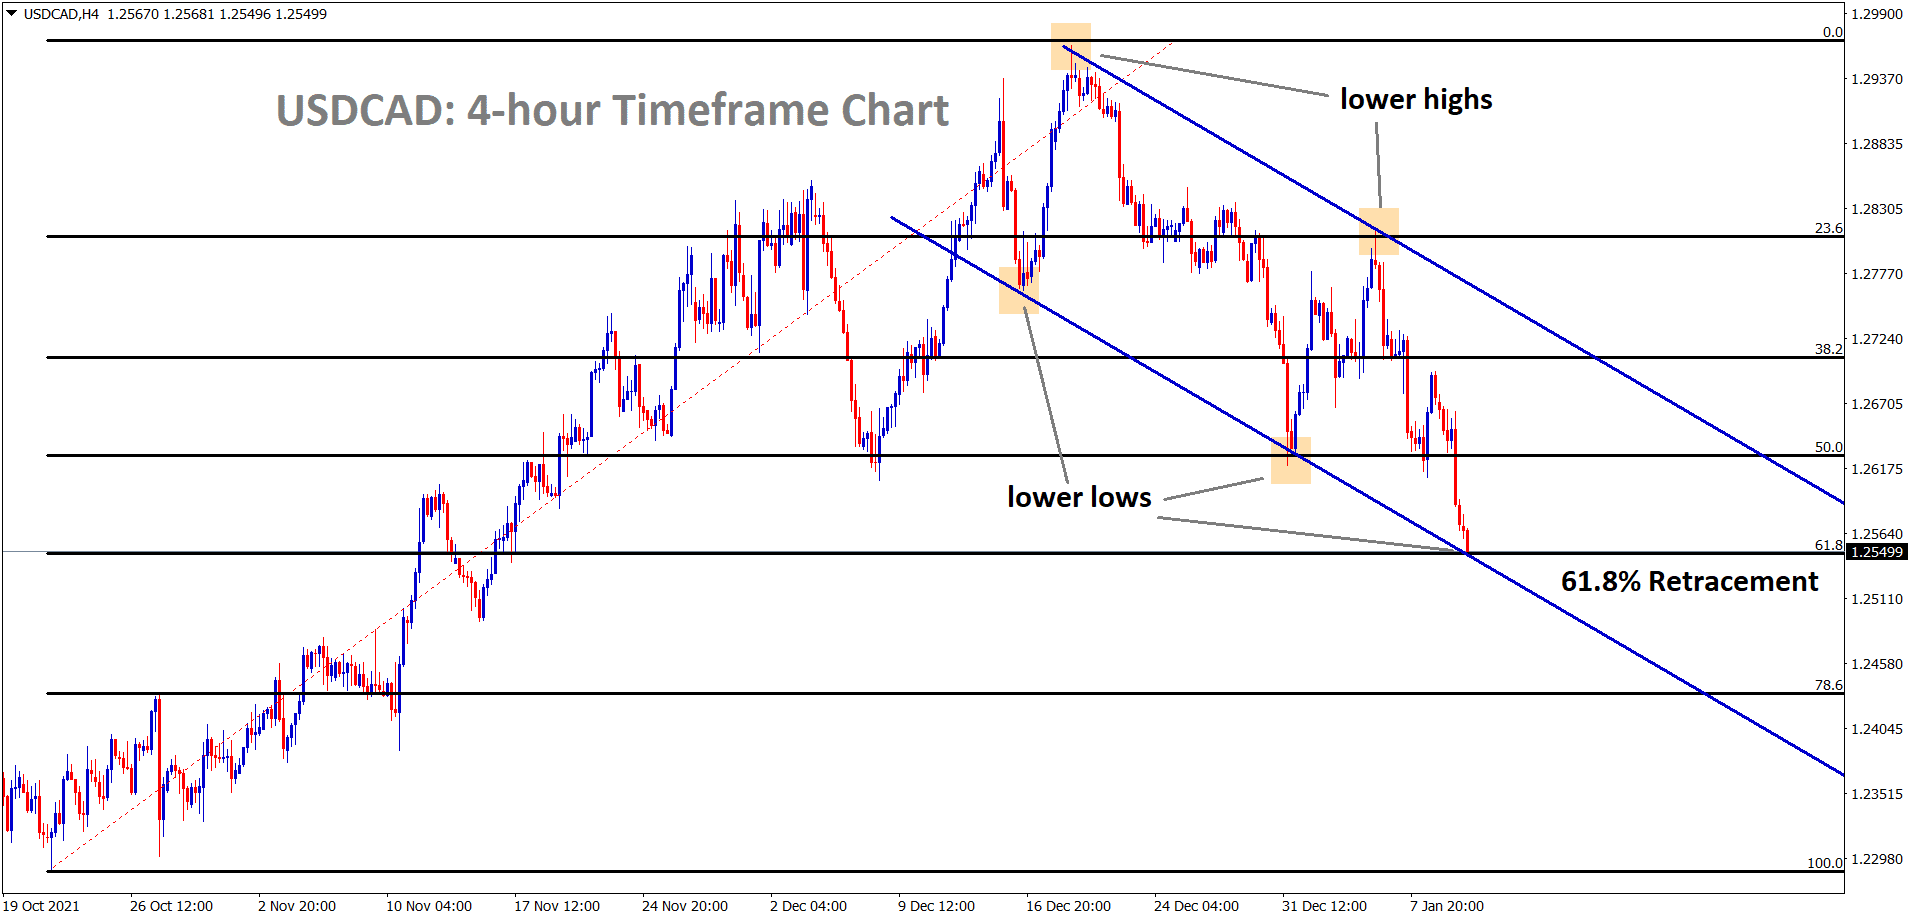 USDCAD has made 61 percent fibonacci retracement and hits the lower low of the channel